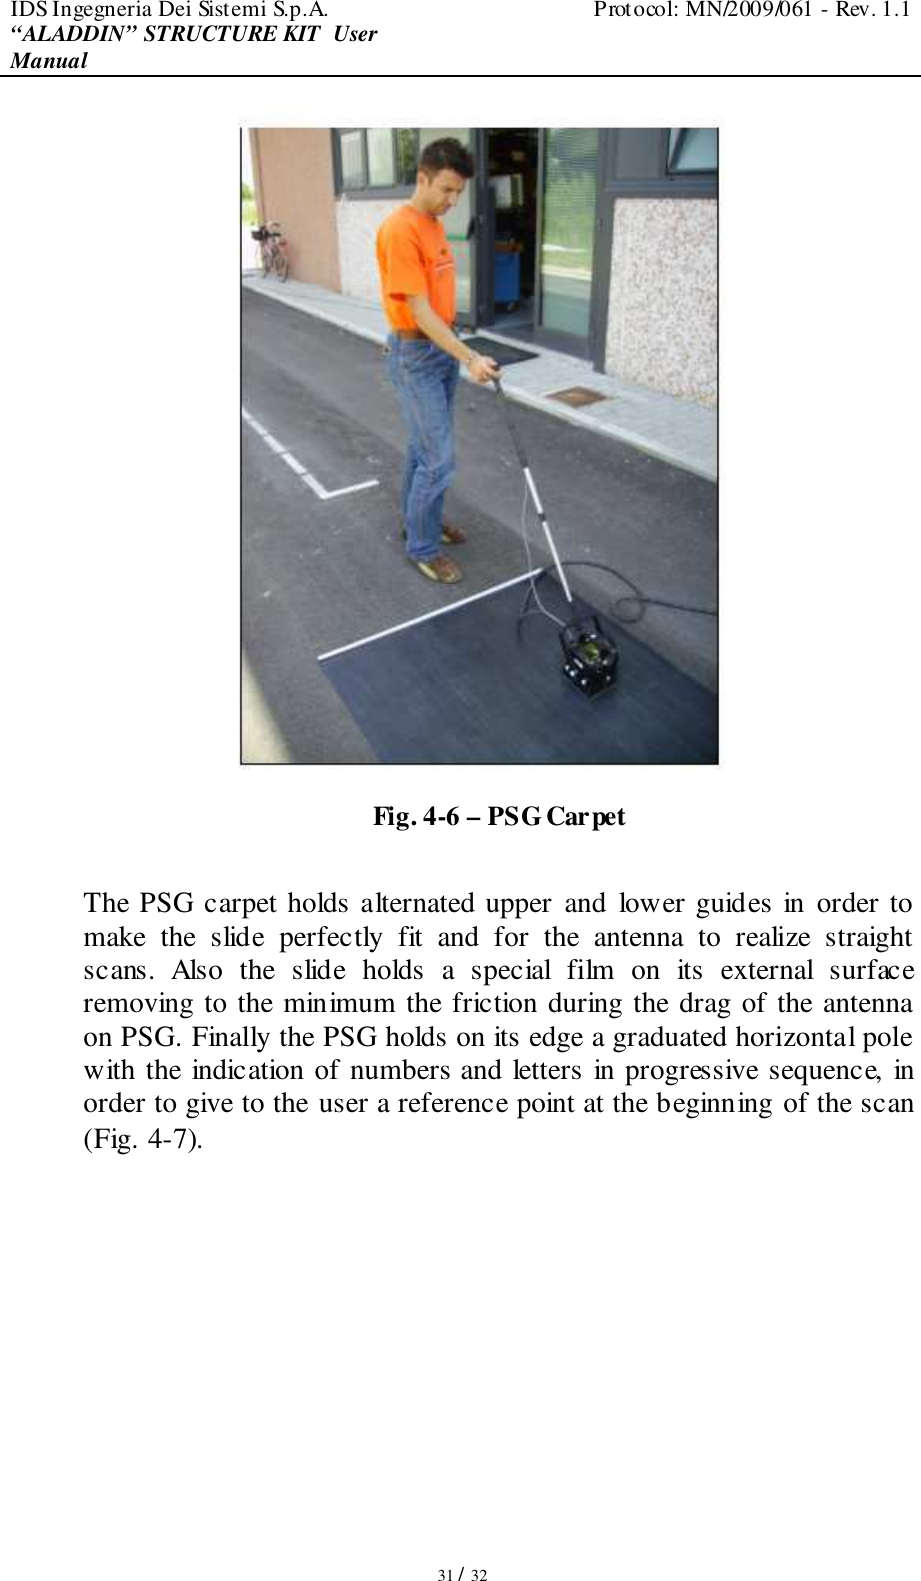 IDS Ingegneria Dei Sistemi S.p.A.  Protocol: MN/2009/061 - Rev. 1.1 “ALADDIN” STRUCTURE KIT  User Manual   31 / 32  Fig. 4-6 – PSG Carpet  The PSG carpet holds alternated upper and  lower guides in order to make  the  slide  perfectly  fit  and  for  the  antenna  to  realize  straight scans.  Also  the  slide  holds  a  special  film  on  its  external  surface removing to the minimum the friction during the drag of the antenna on PSG. Finally the PSG holds on its edge a graduated horizontal pole with the indication of numbers and letters in progressive sequence, in order to give to the user a reference point at the beginning of the scan (Fig. 4-7).  